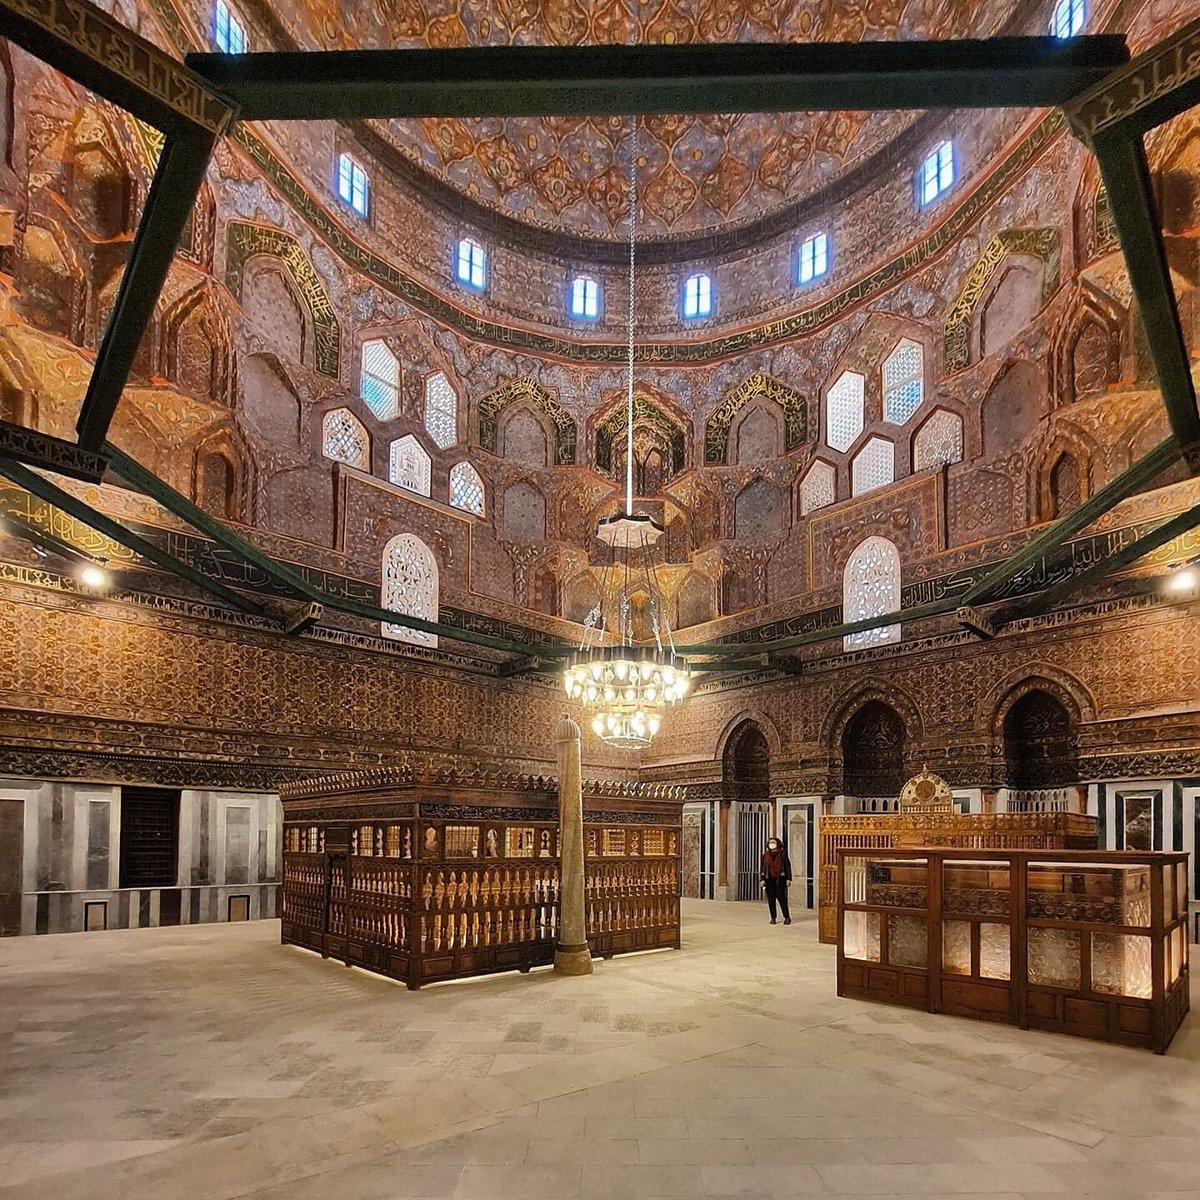 15 years ago I published my first article. It was about the Mausoleum of Imam al-Shafi'i in Cairo, built in 1211 by Sultan al-Kamil, nephew of the great Saladin. Now it is again resplendent thanks to an exquisite restoration by May al-Ibrashy & team. A story for  #WorldHeritageDay